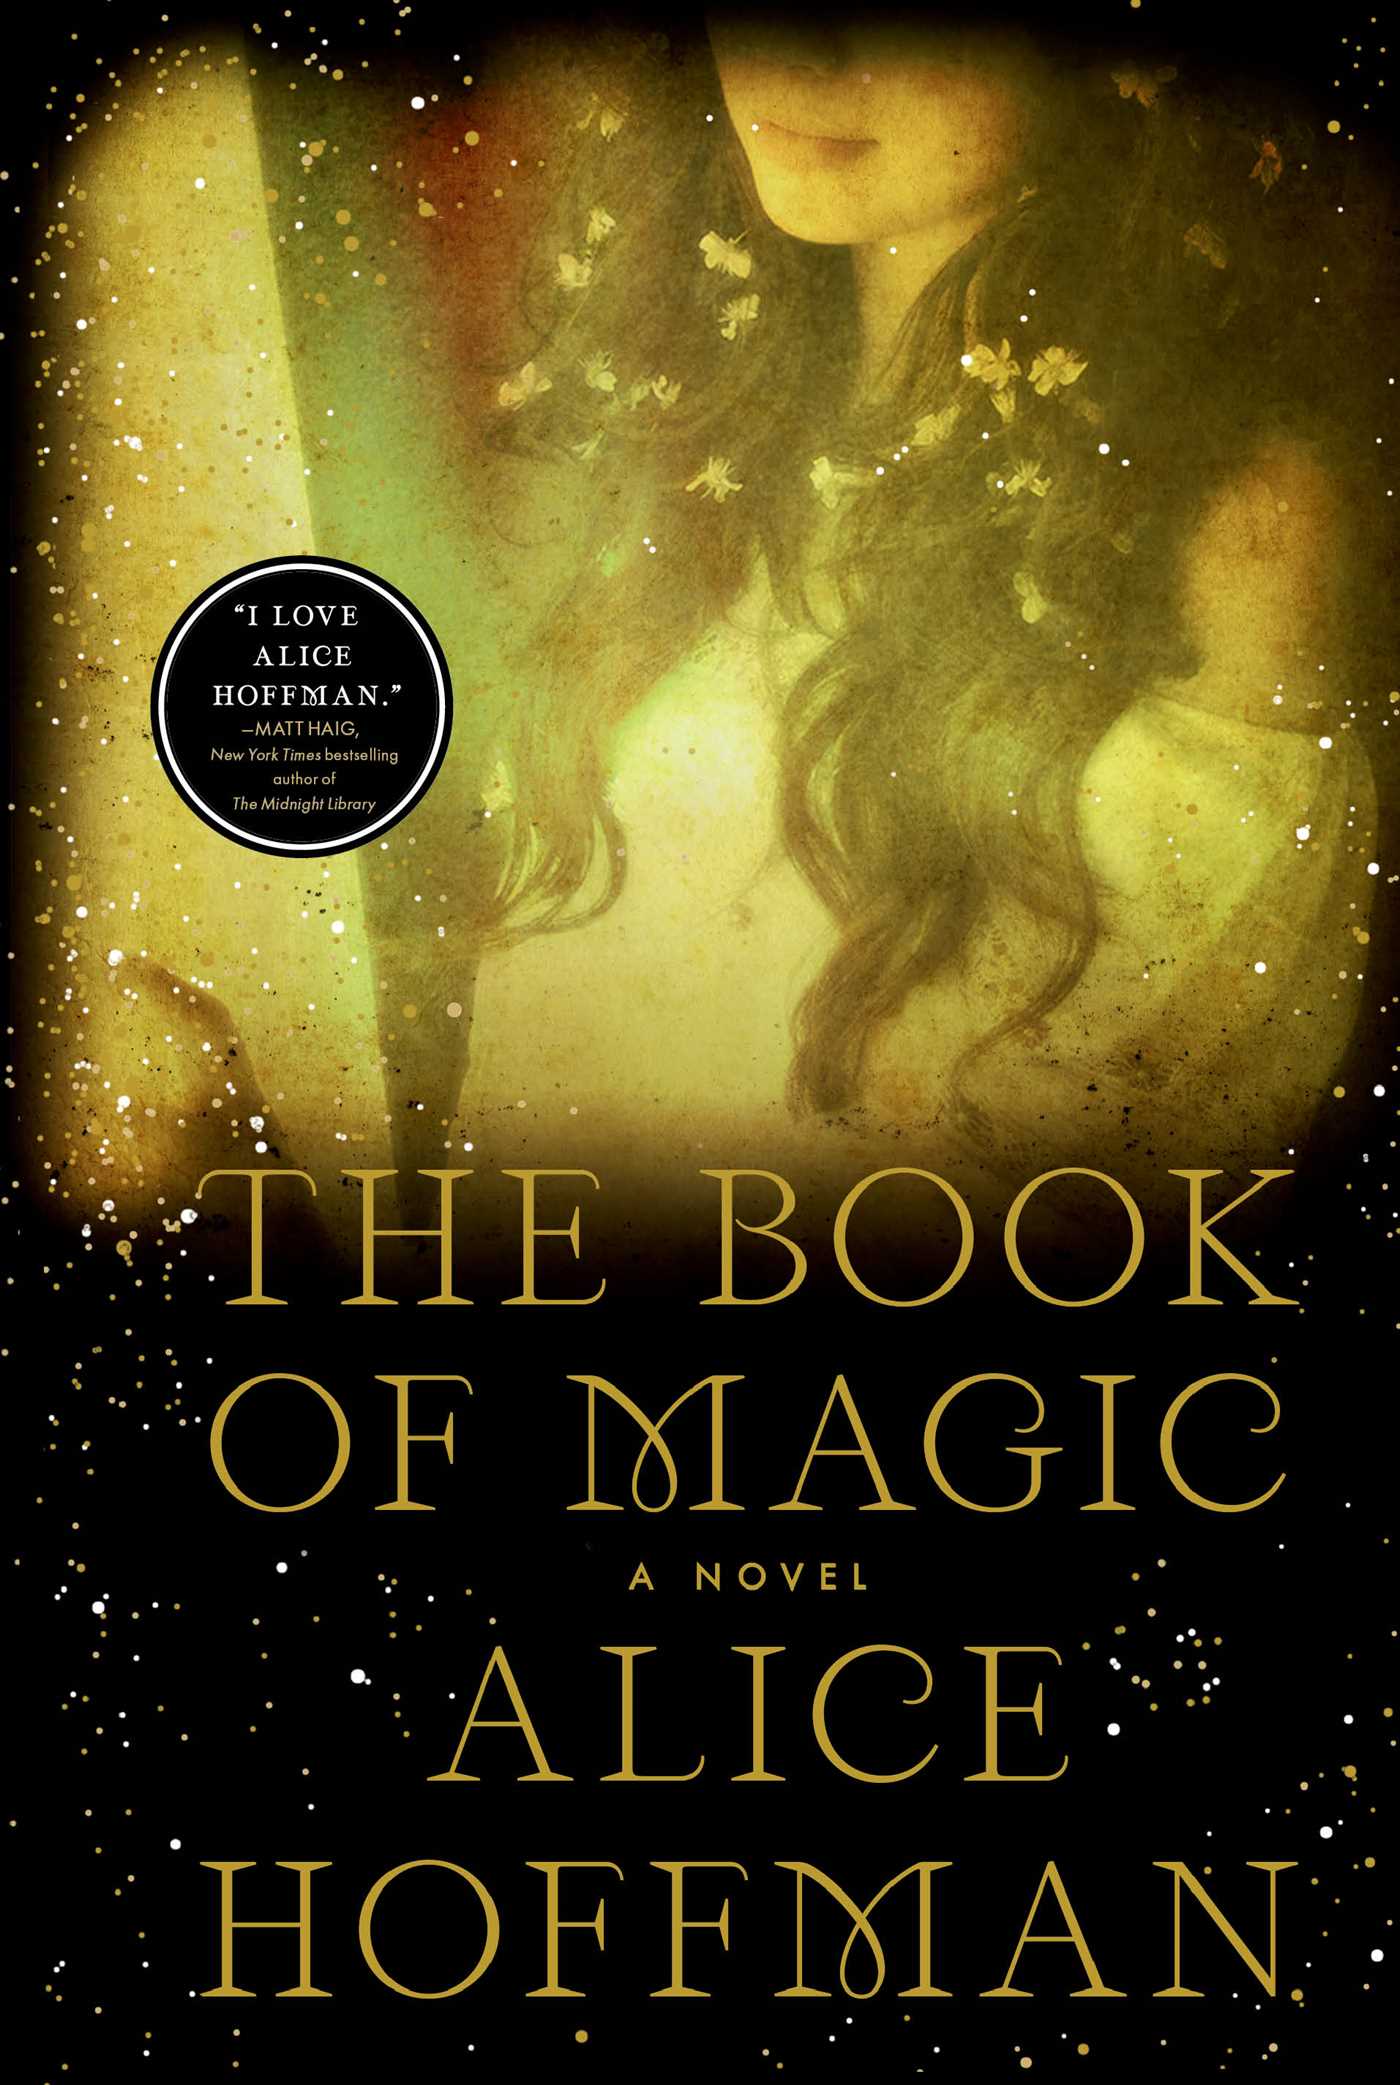 [EPUB] Practical Magic #2 The Book of Magic by Alice Hoffman